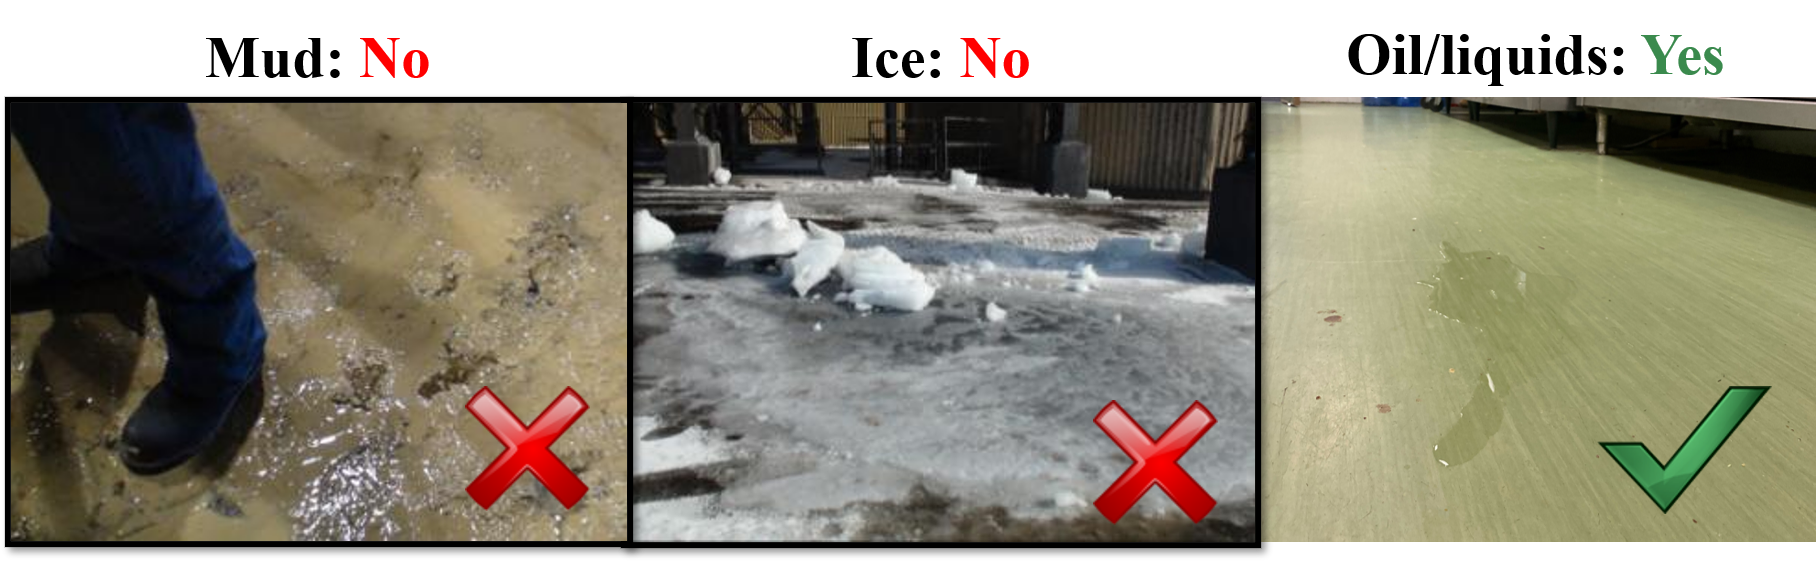 Does the test apply. mud=no, ice=no, oil and liquids=yes 